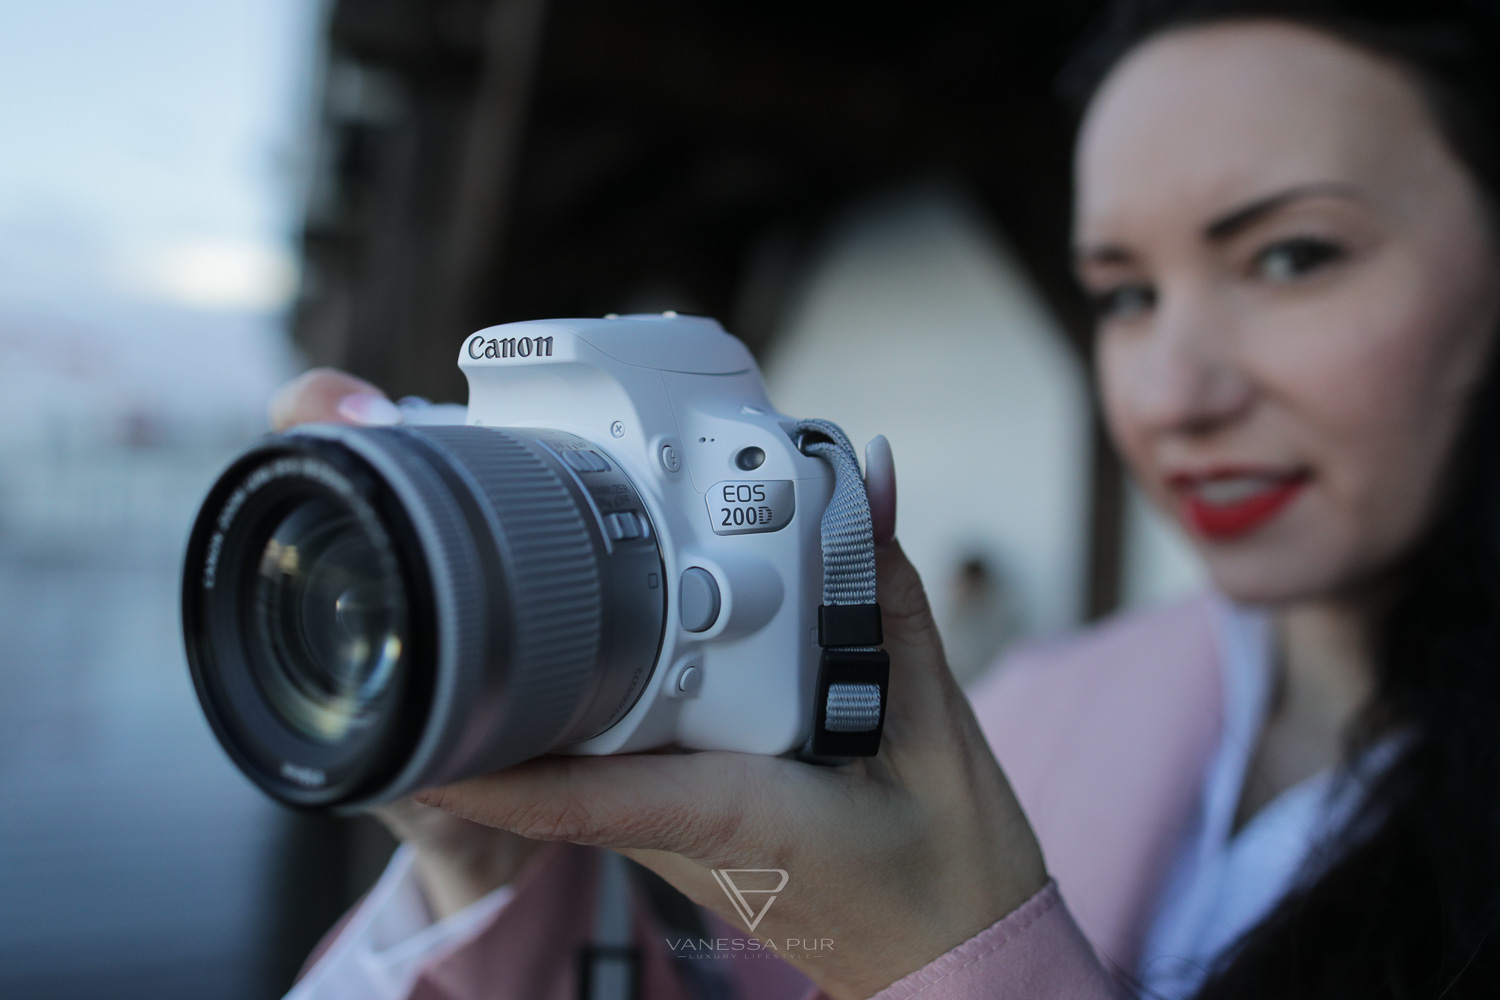 CANON 200D - The entry-level camera for bloggers, YouTuber, amateur photographers - CANON EOS 200D Rebel SL2 Review Test - Photos - Entry-level camera and evaluation of the white SLR DSLR for bloggers and YouTuber - Technology Blogger - Experience and Impressions